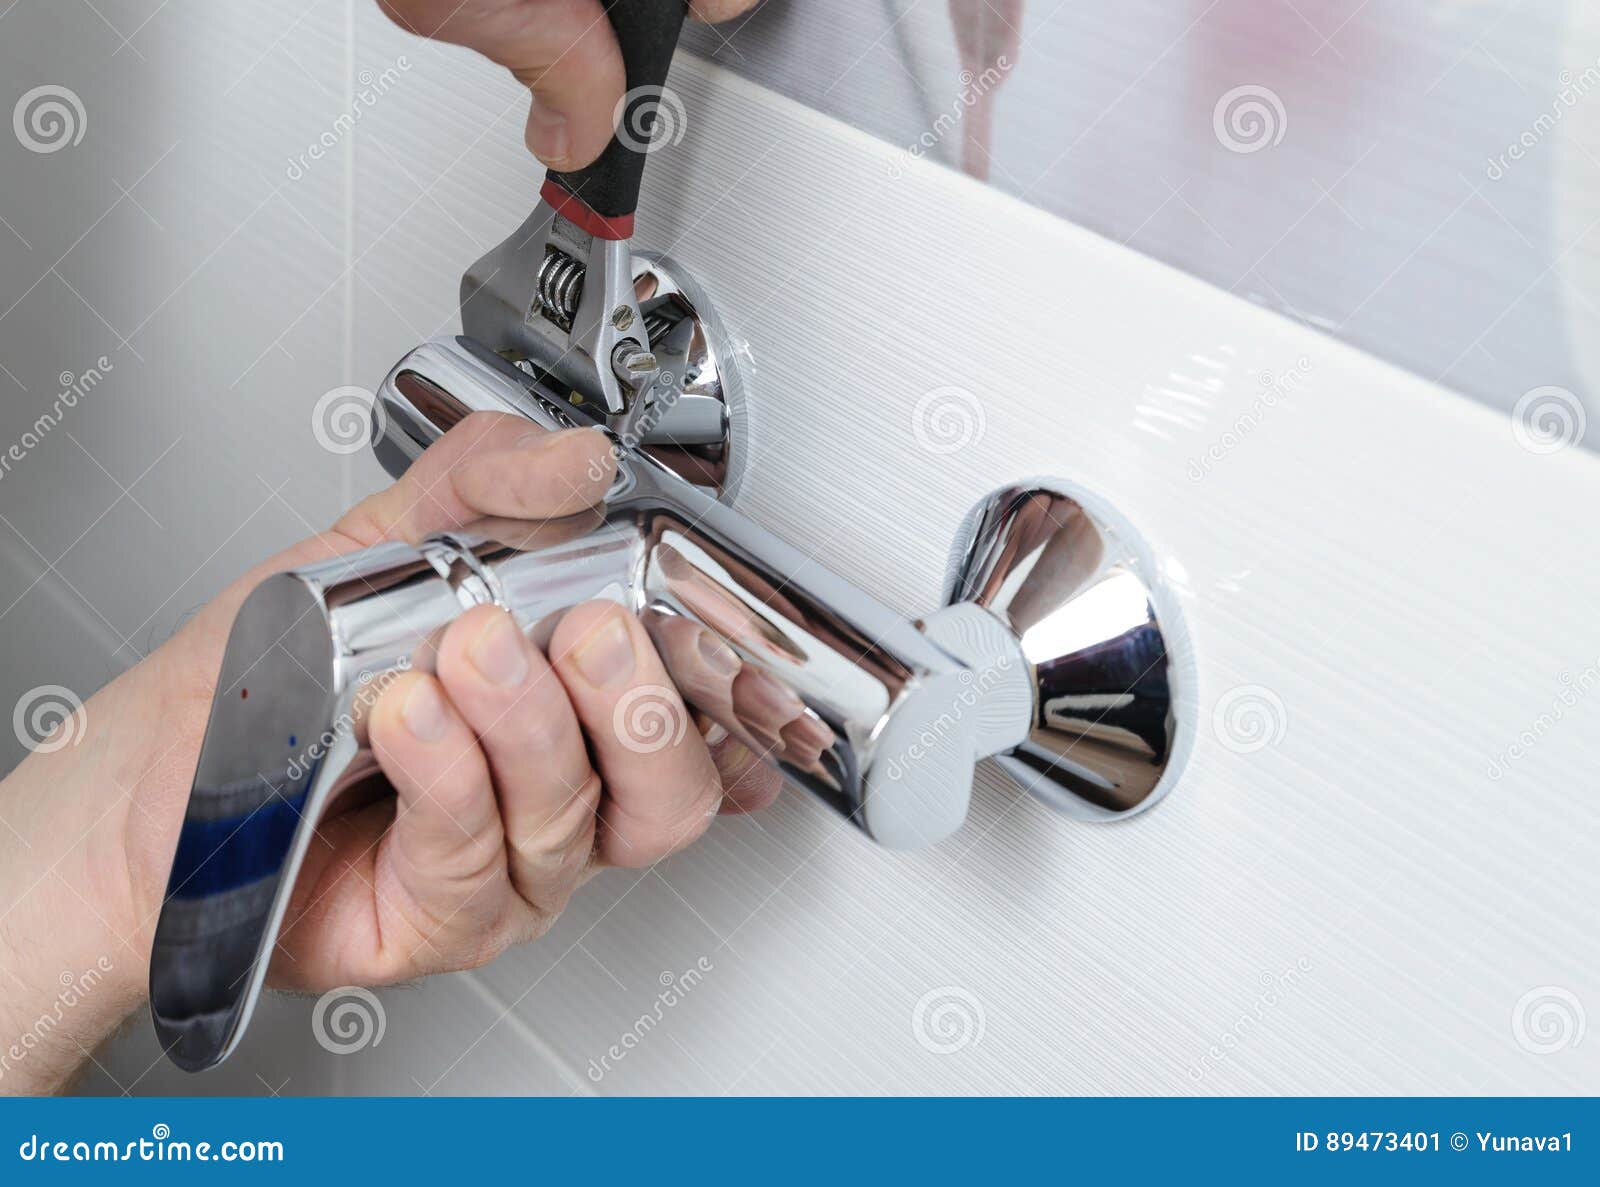 Installing A Shower Faucet Stock Image Image Of Workman